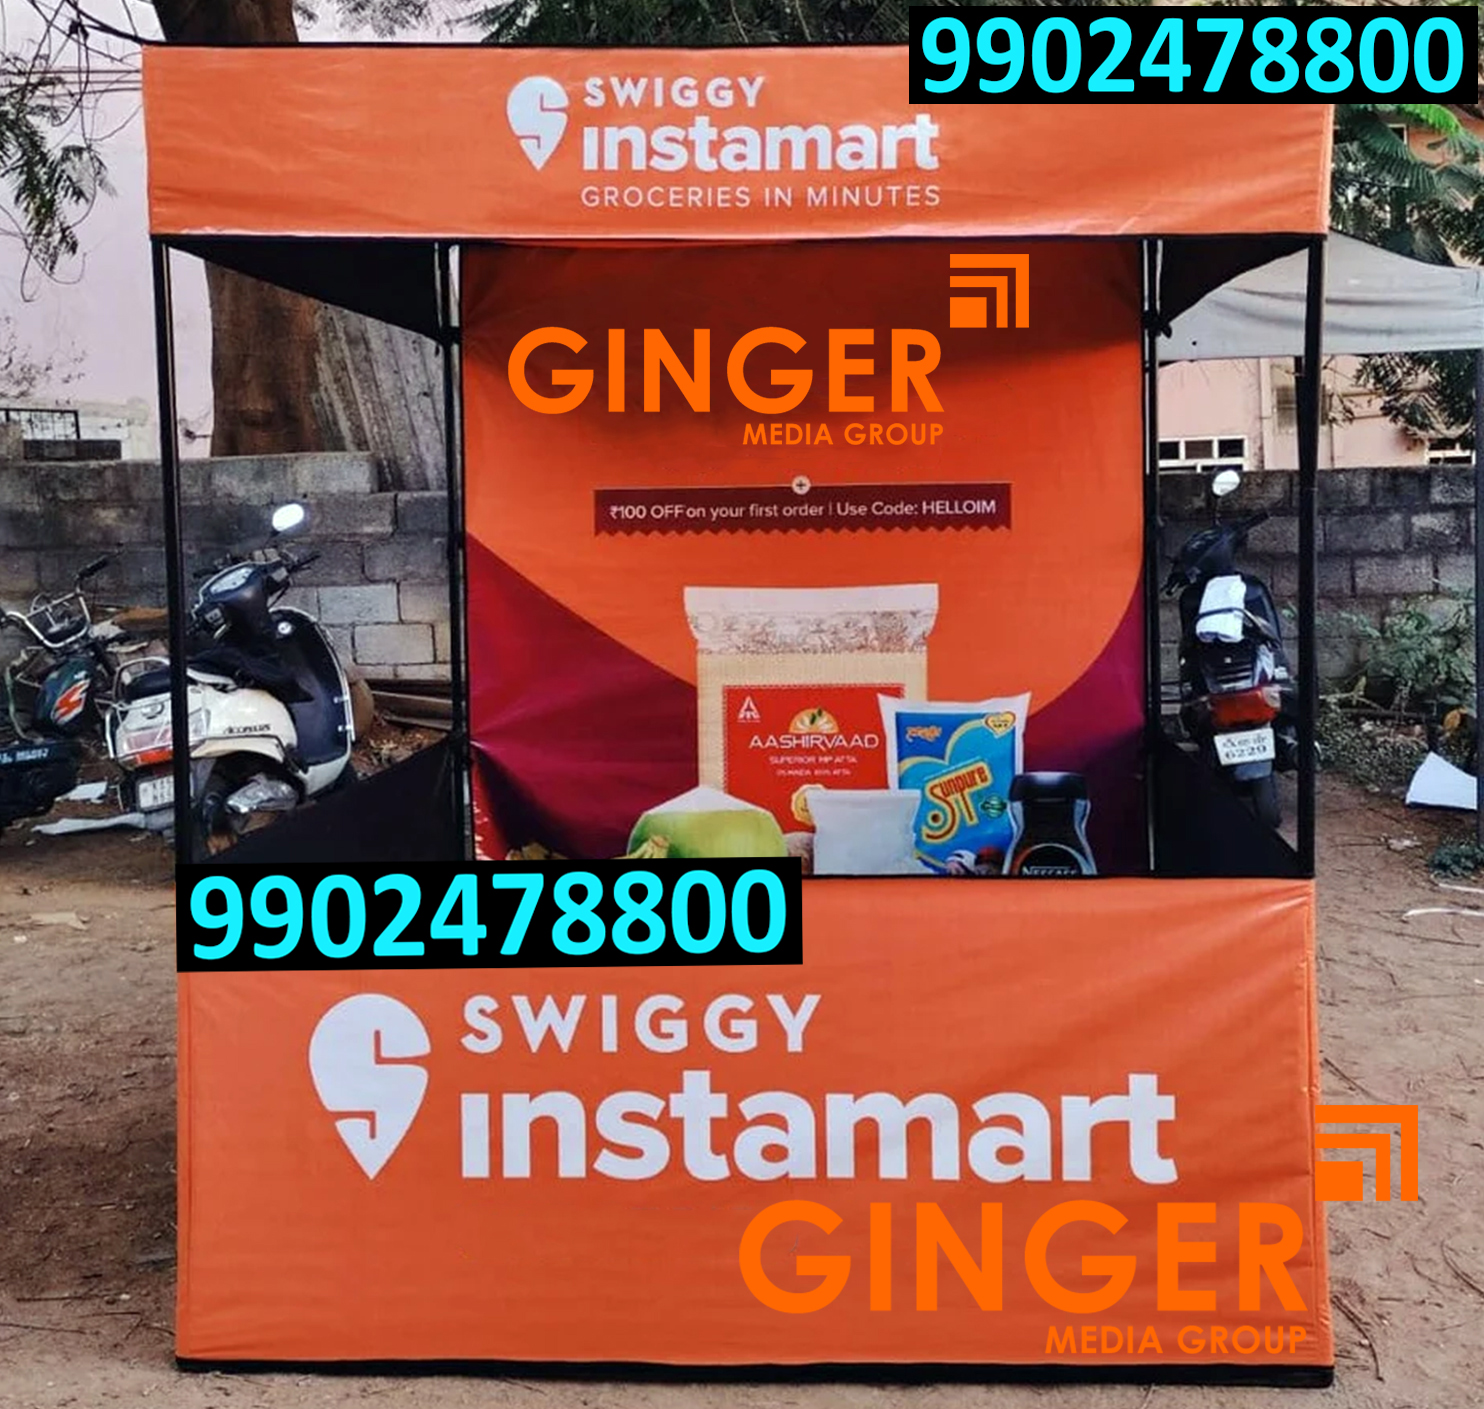 Promo Tables in Pune for Swiggy instamart